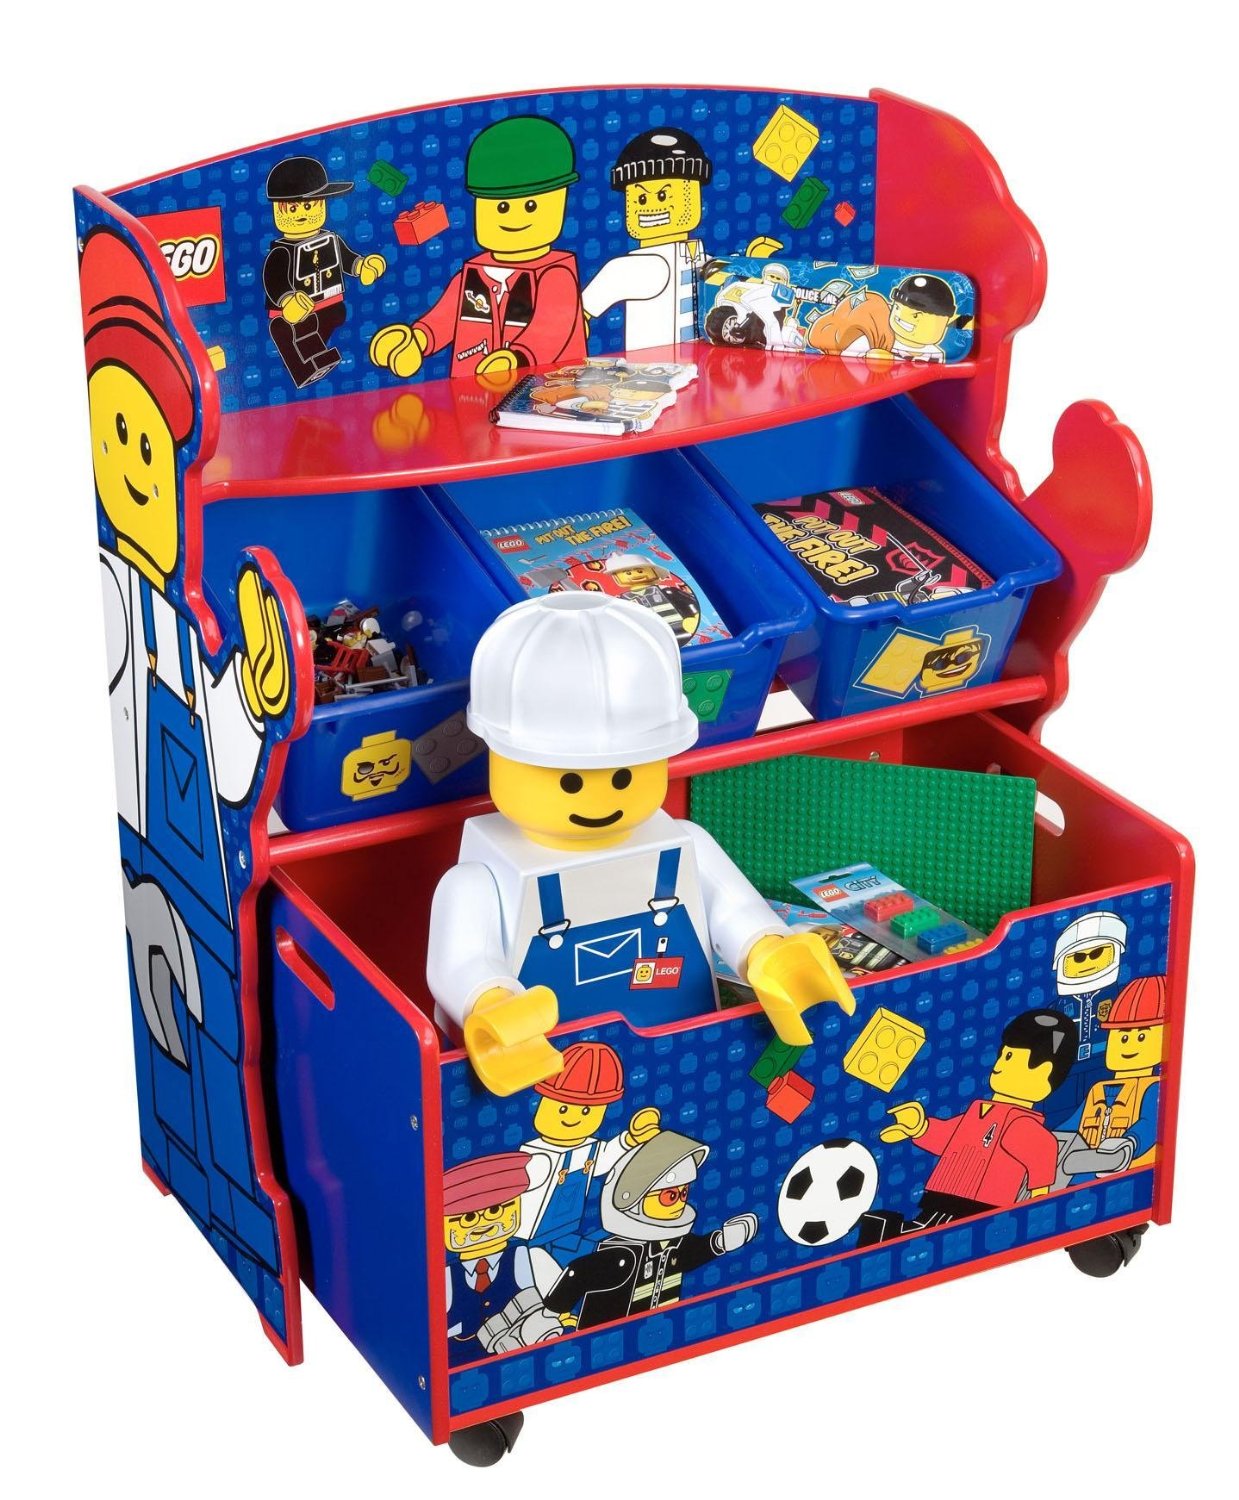 40L HEAVY DUTY RED & BLUE STORAGE BOX TRUNK CHEST KIDS TOYS TOOLS LEGO BOOKS 